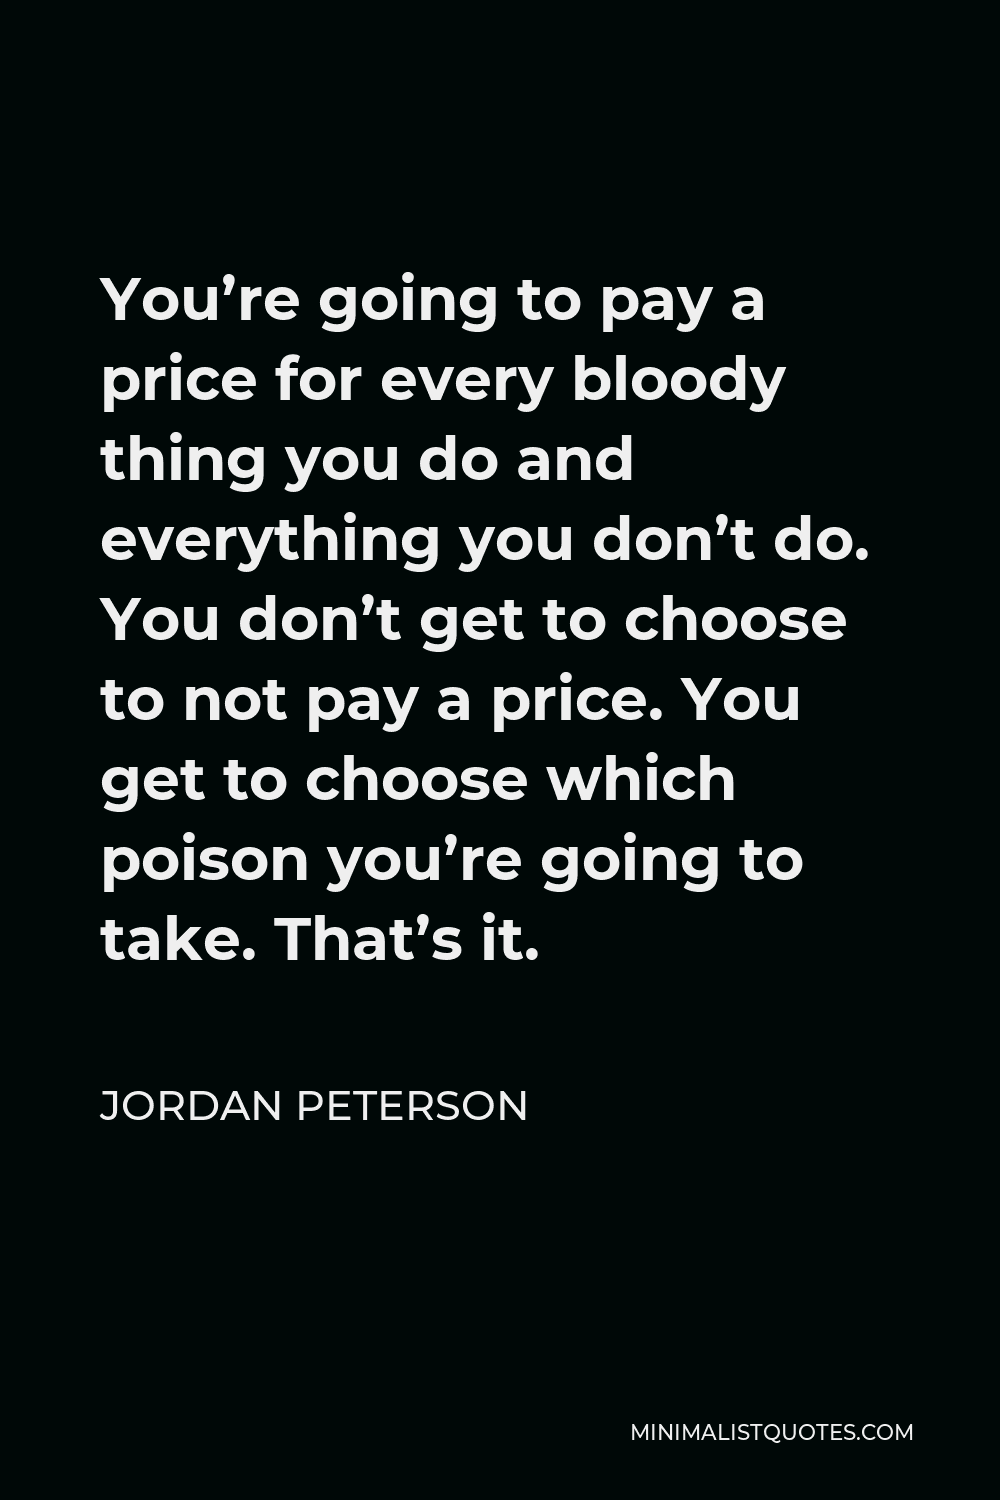 Jordan Peterson Quote - You’re going to pay a price for every bloody thing you do and everything you don’t do. You don’t get to choose to not pay a price. You get to choose which poison you’re going to take. That’s it.